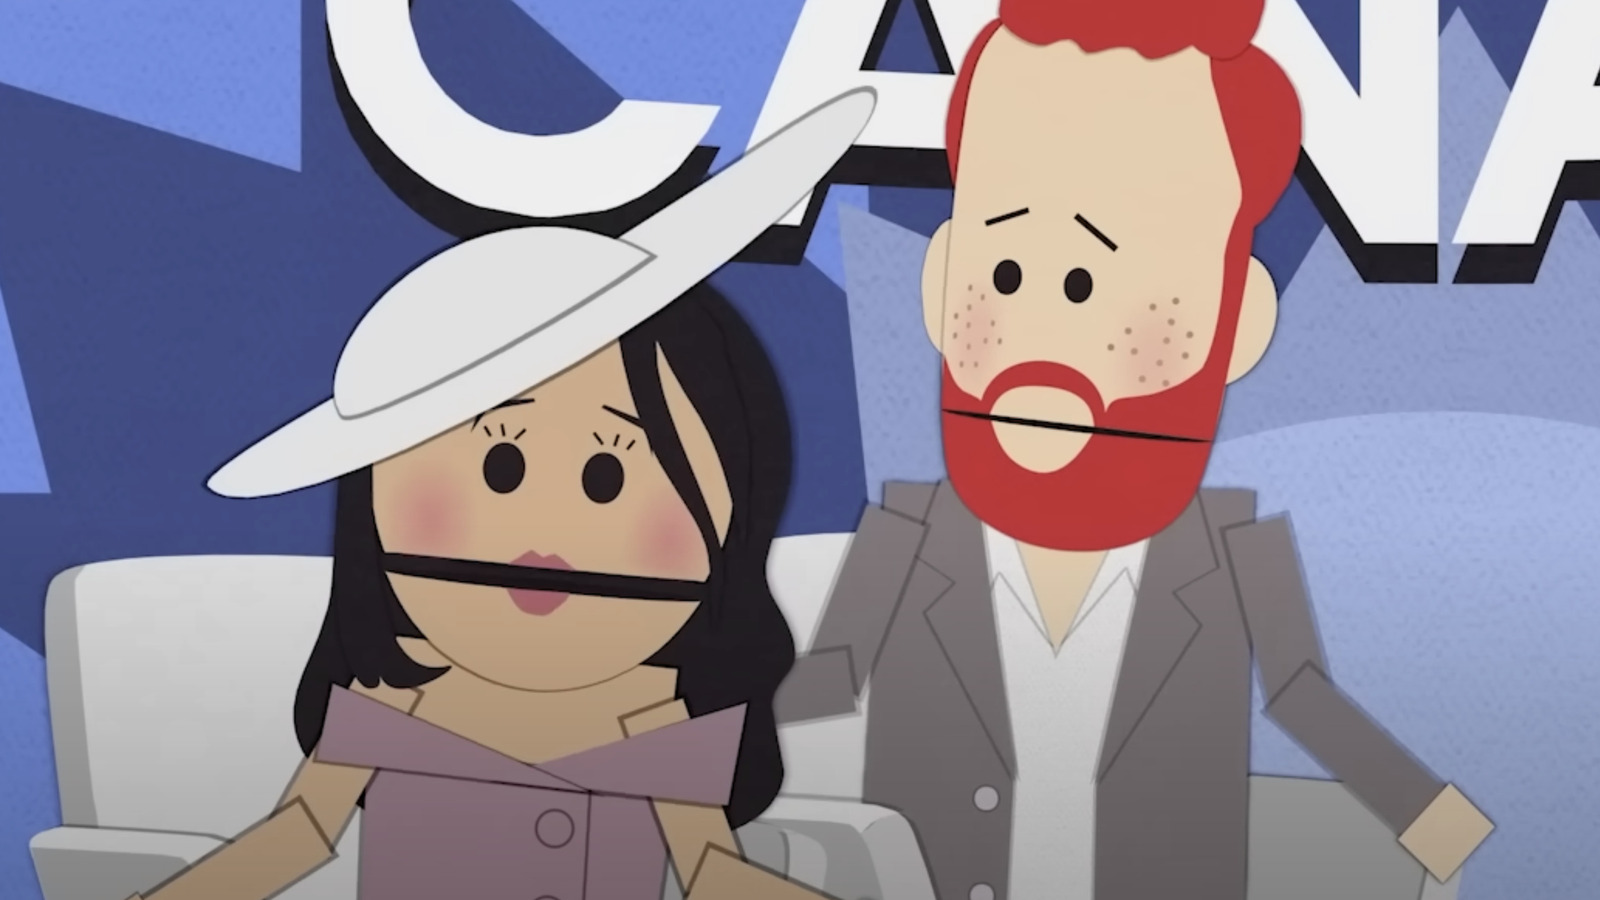 20 'South Park' Celebrity Reactions: Fans and Feuds – IndieWire